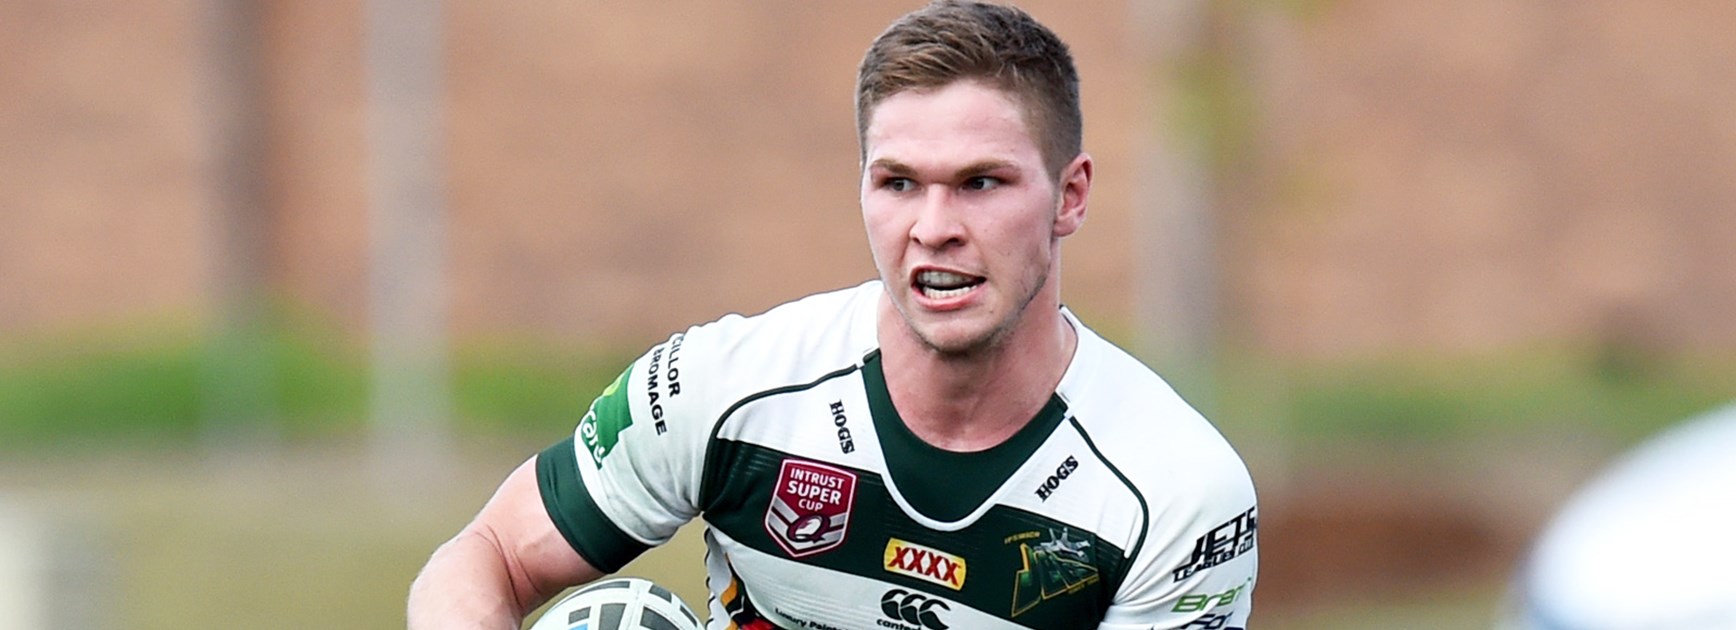 Manly-bound Matt Parcell is hoping to farewell the Intrust Super Cup with a grand final win with Ipswich on Sunday.